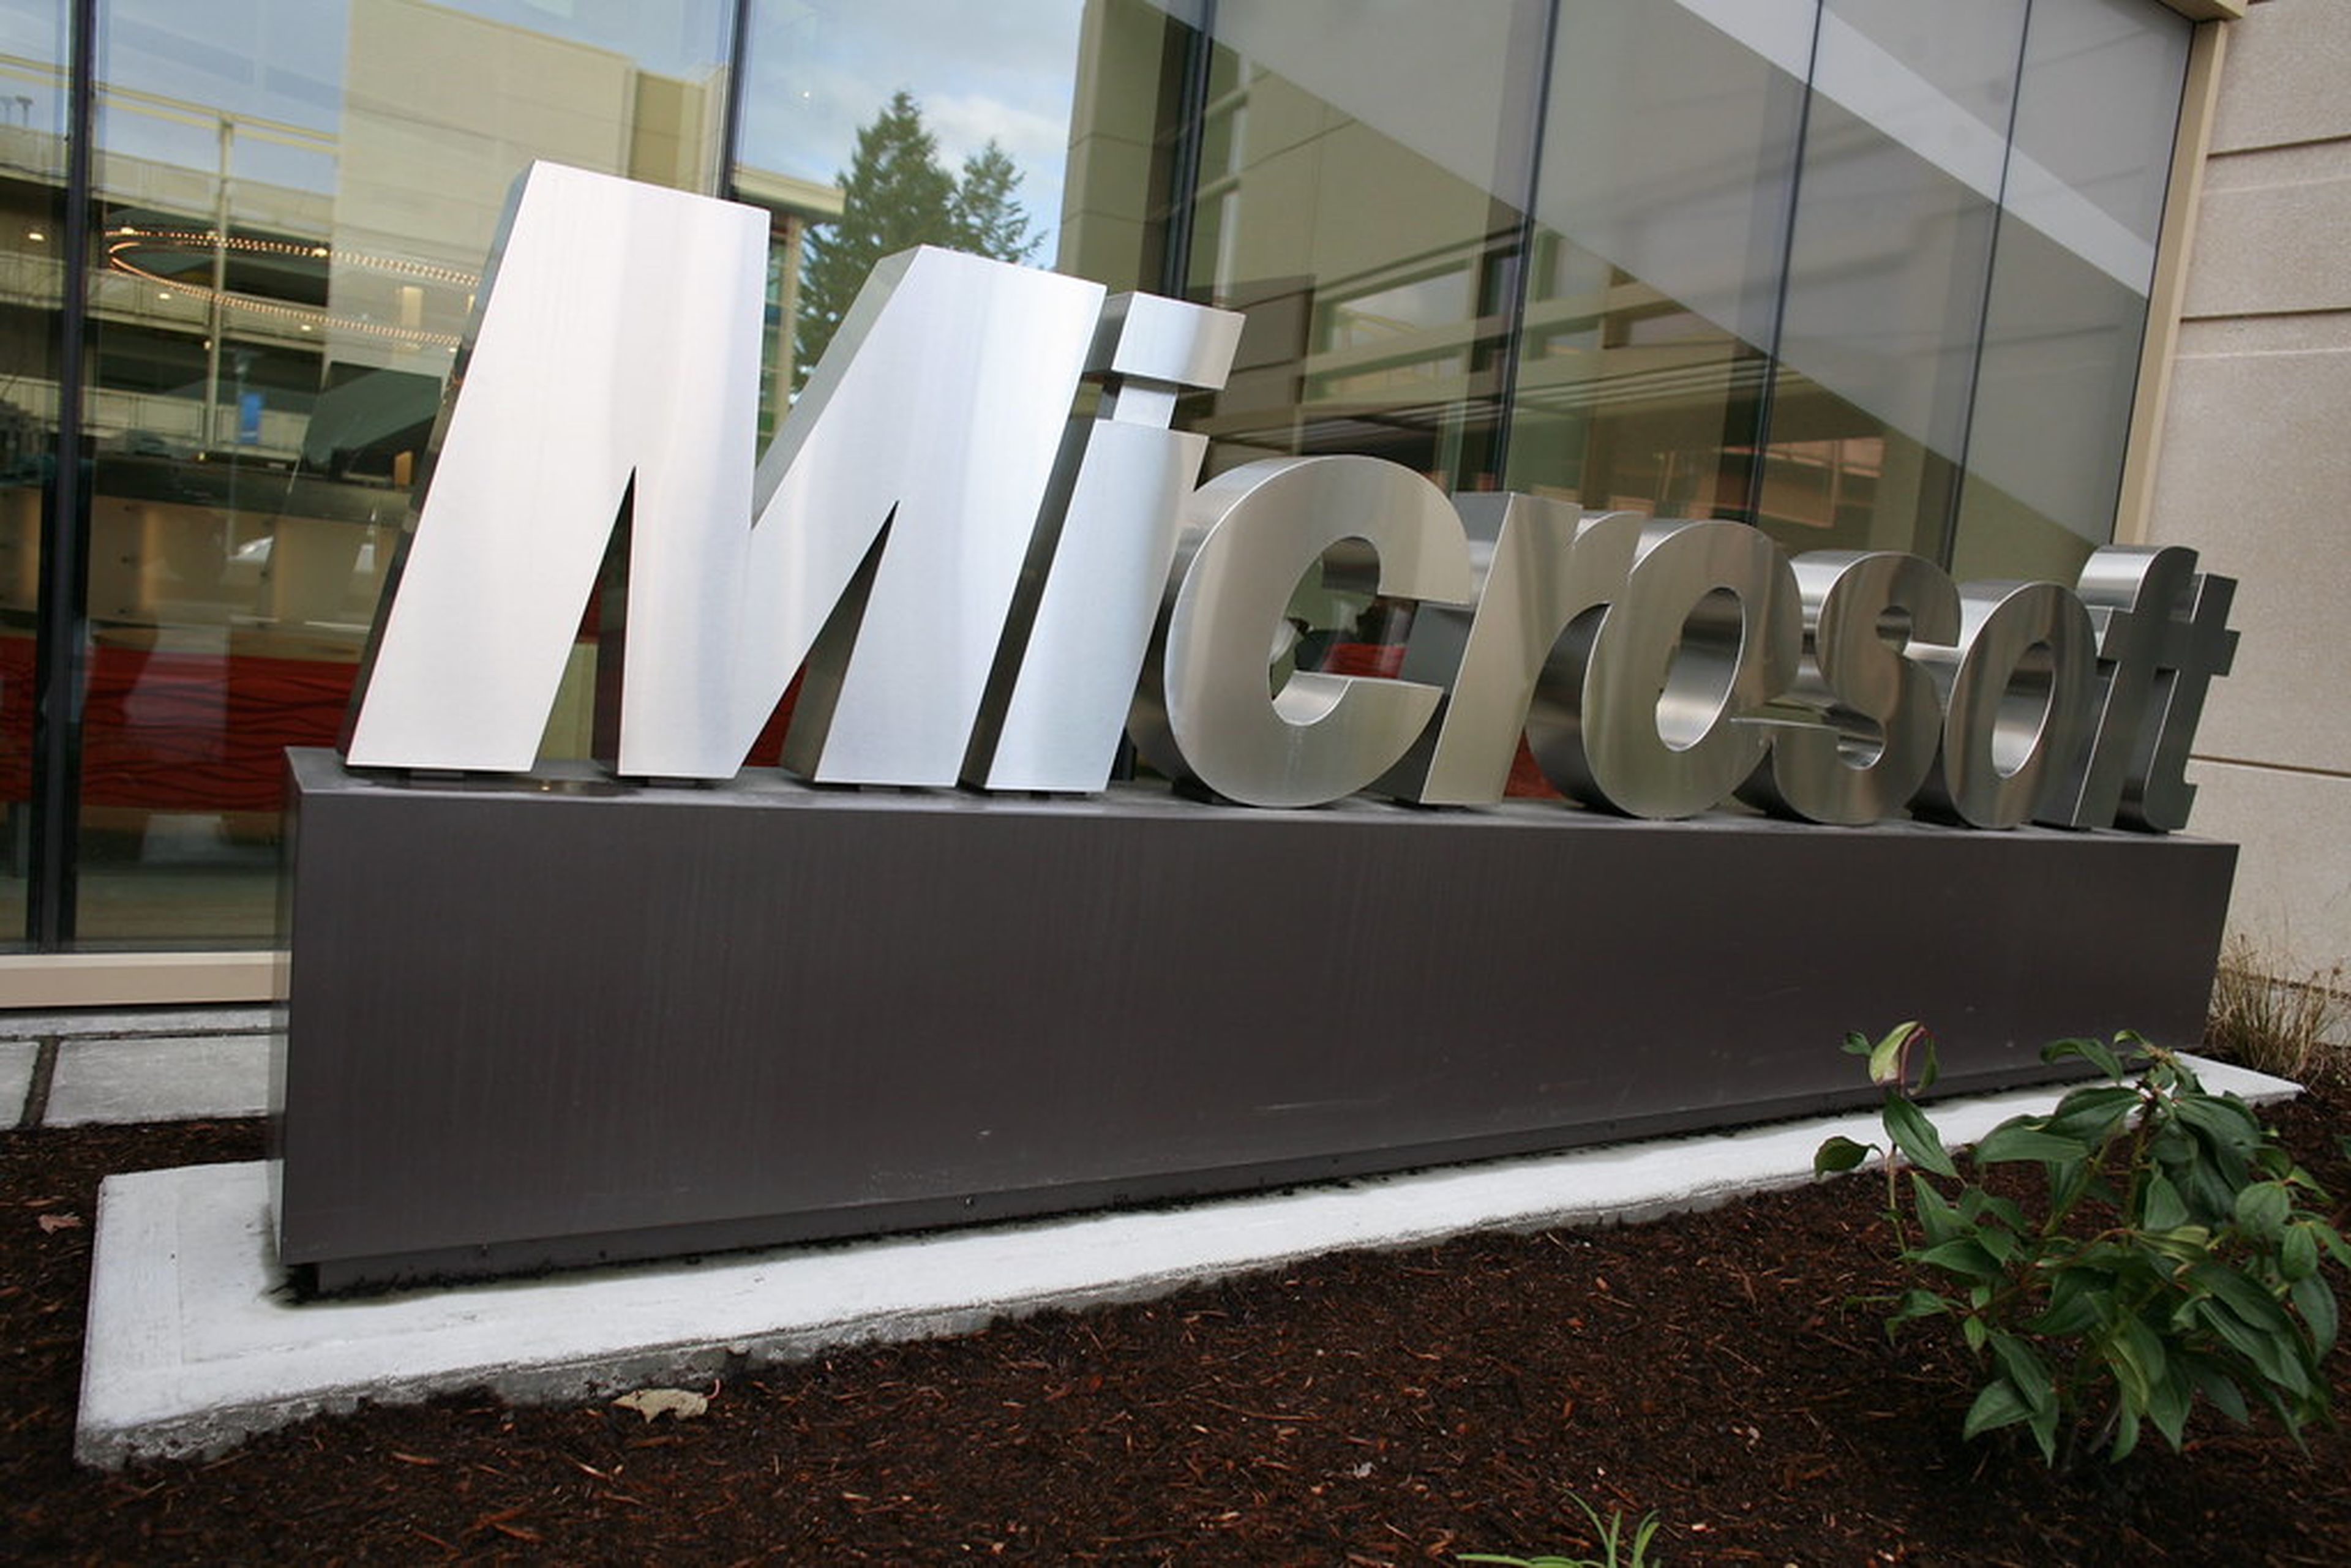 The Zloader botnet has been taken down, due to a joint investigation and legal action taken by Microsoft, Health-ISAC, and others.(Photo credit: &#8220;Microsoft sign outside building 99&#8221; by Robert Scoble is marked with CC BY 2.0.)